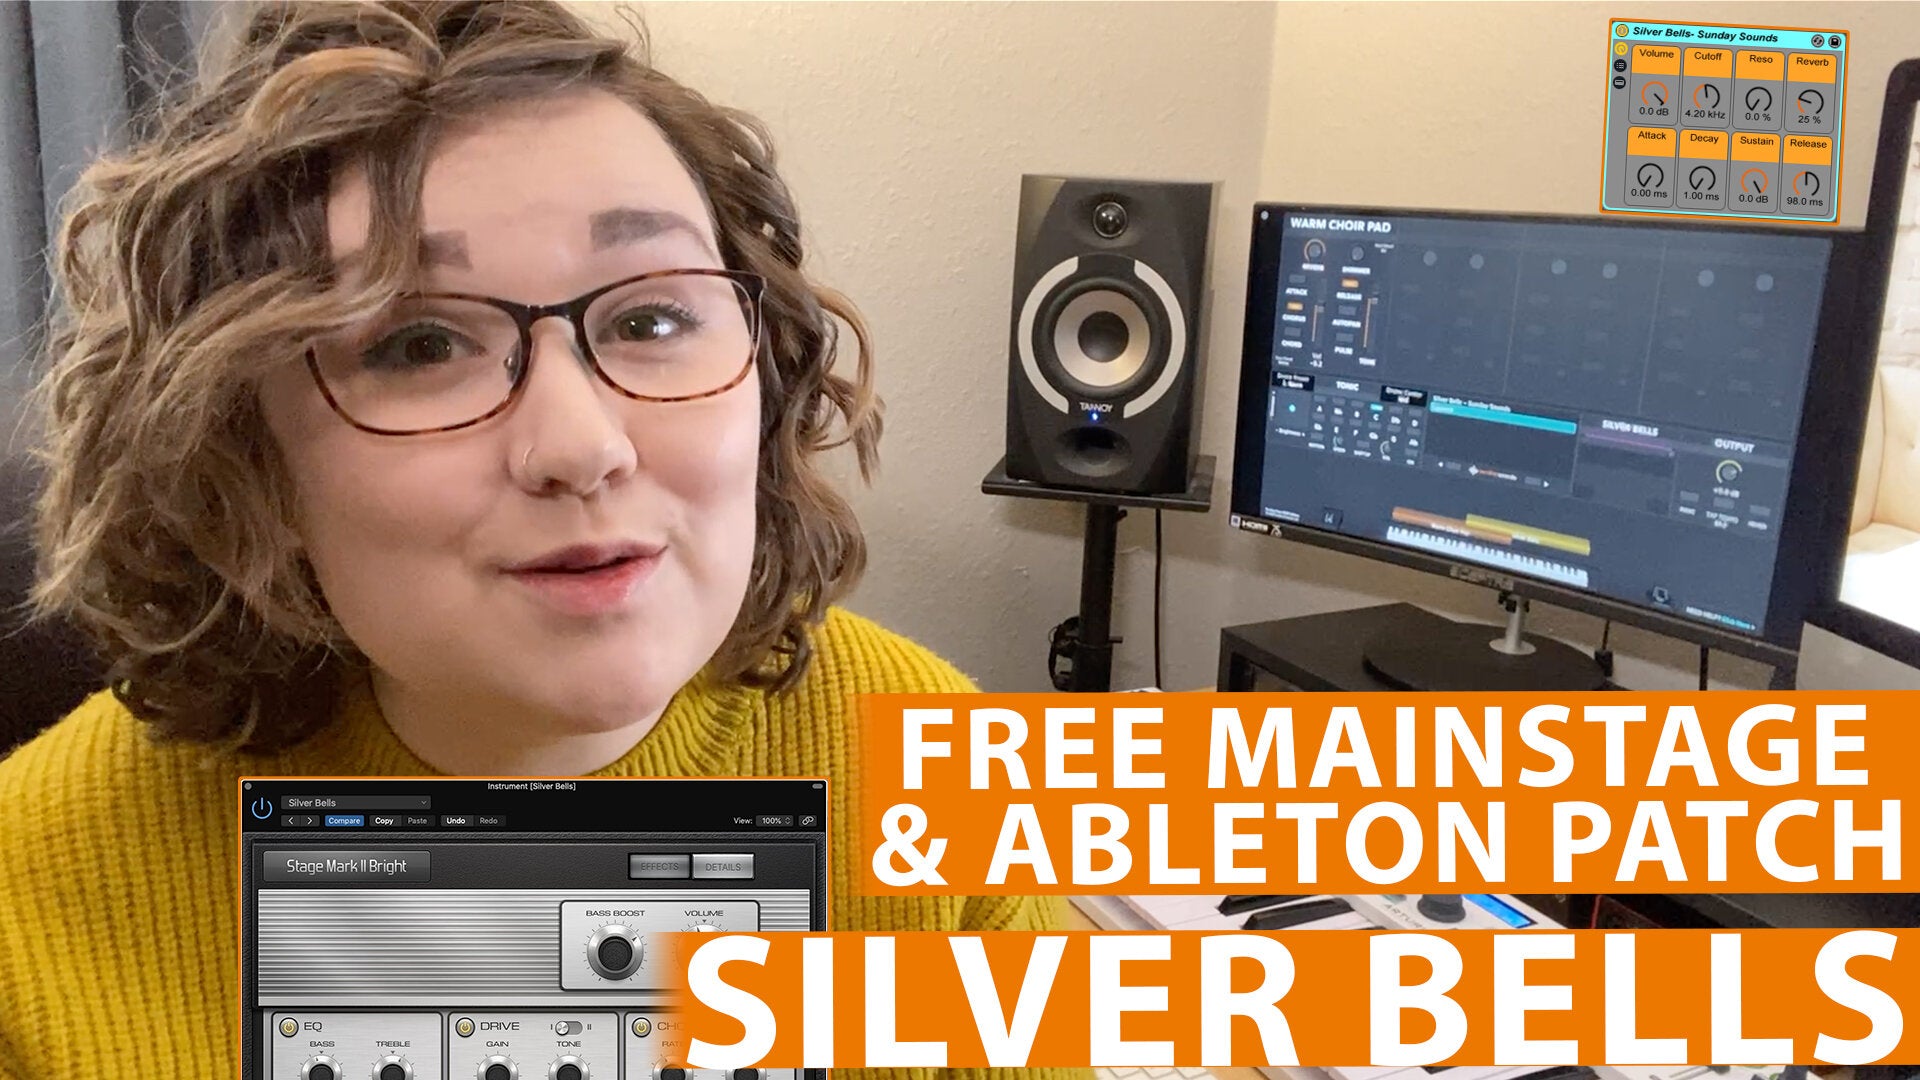 Free MainStage & Ableton Worship Patch! - Silver Bells